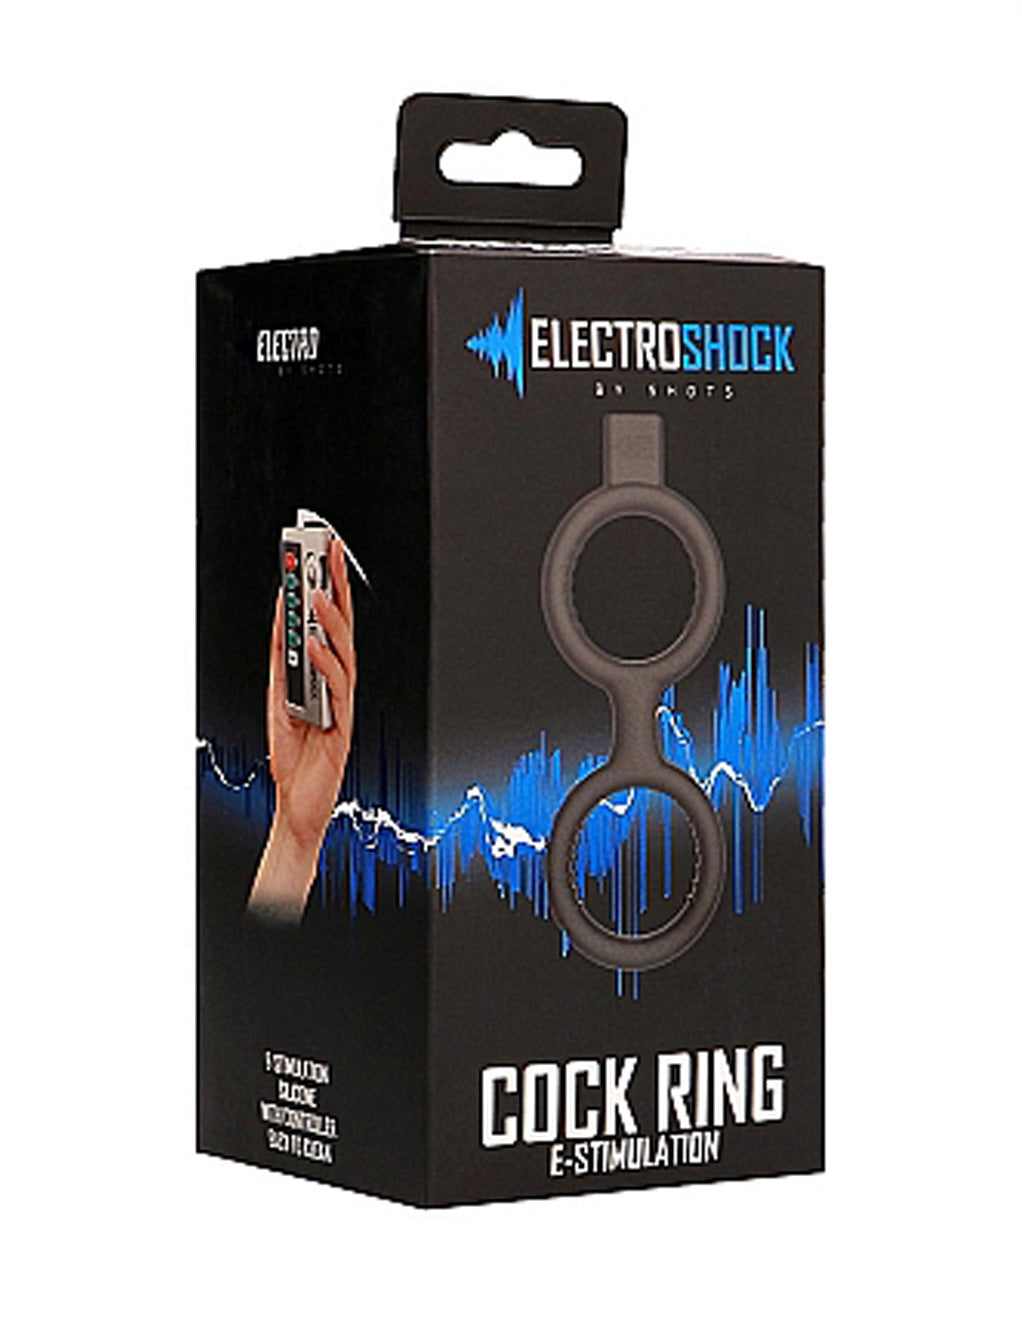 E-Stimulation Cock Ring with Ballstrap by Electroshock packaging